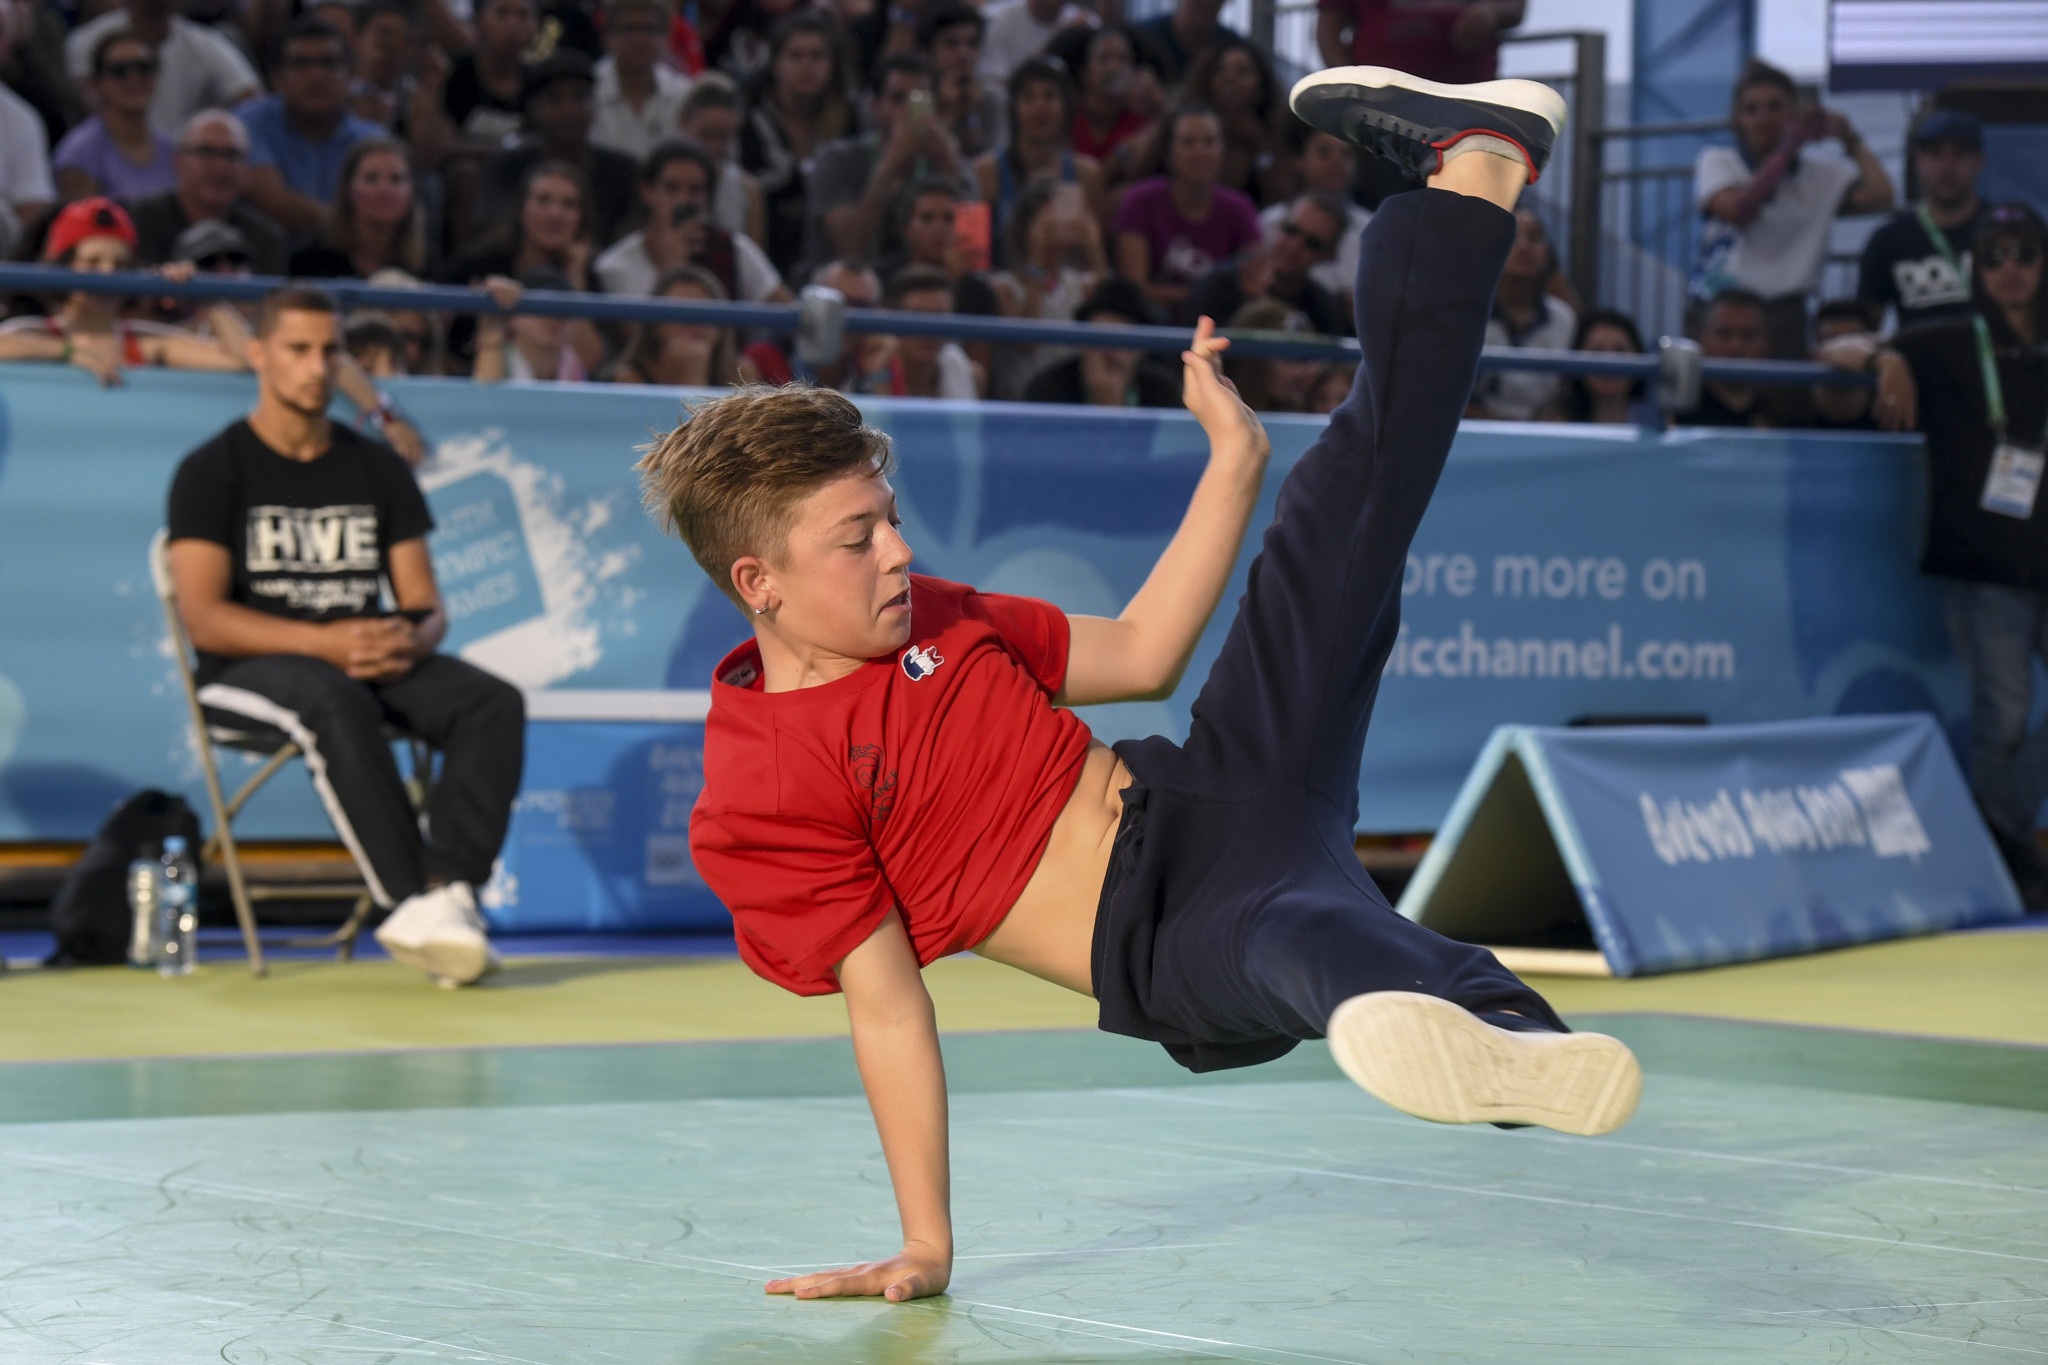 Breakdancing is set to make another Olympic appearance ©Getty Images